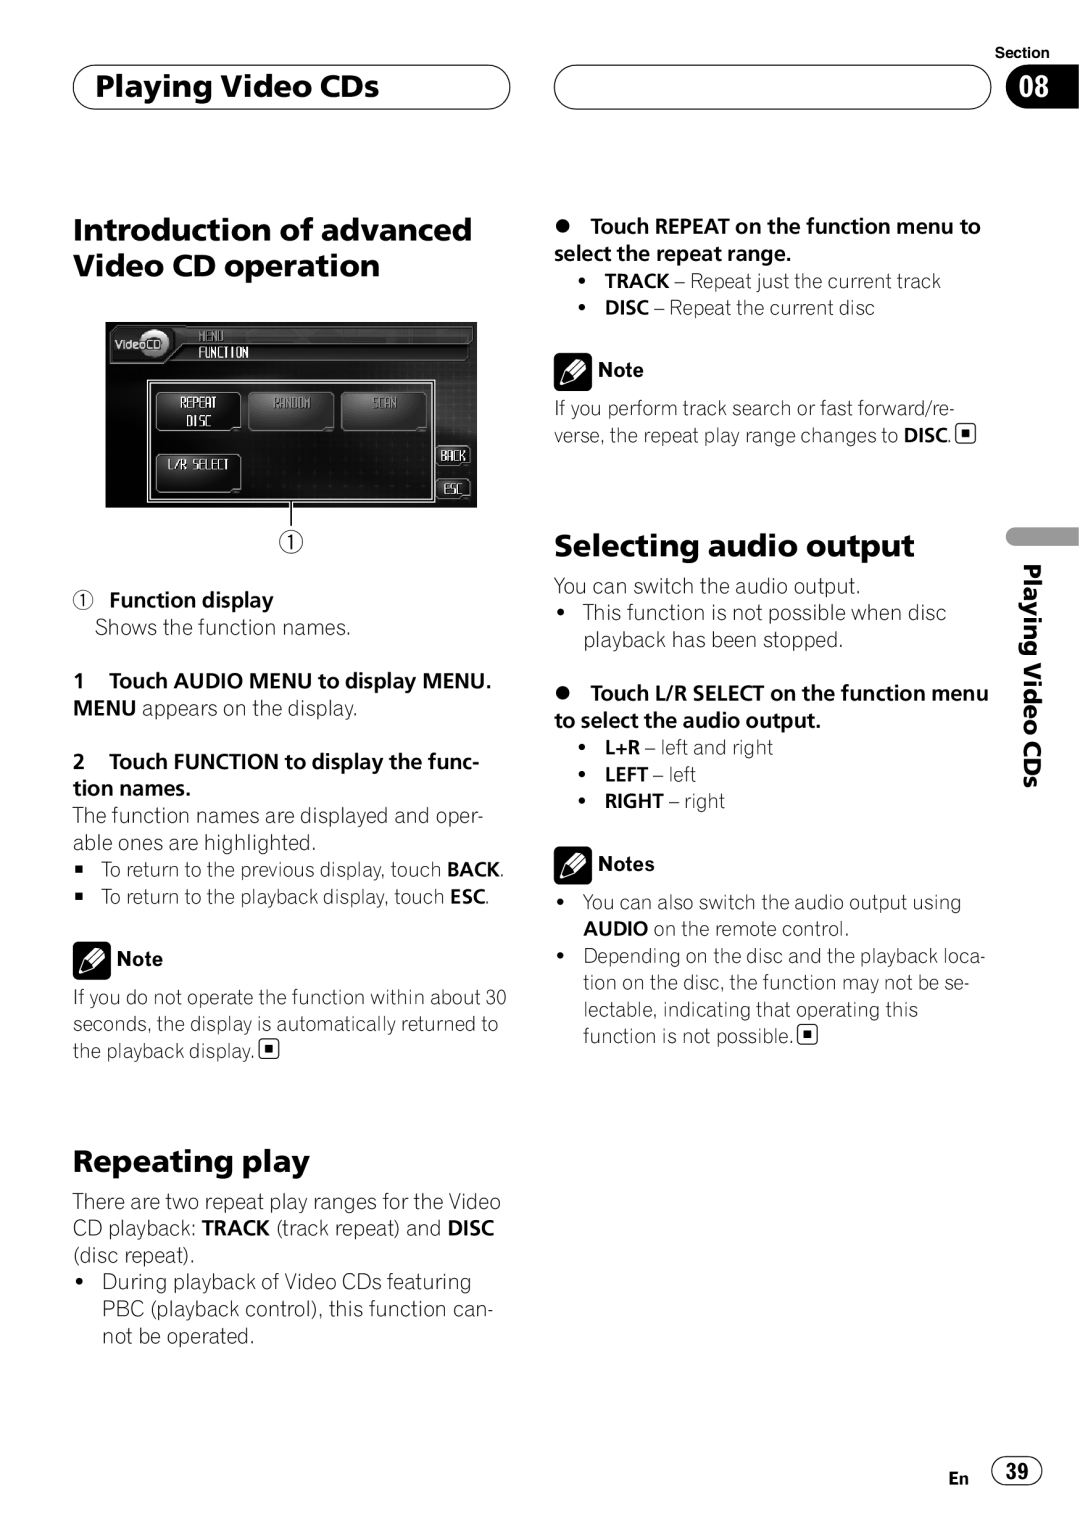 Pioneer AVH-P6800DVD operation manual Introduction of advanced Video CD operation, Playing Video CDs, Repeating play 